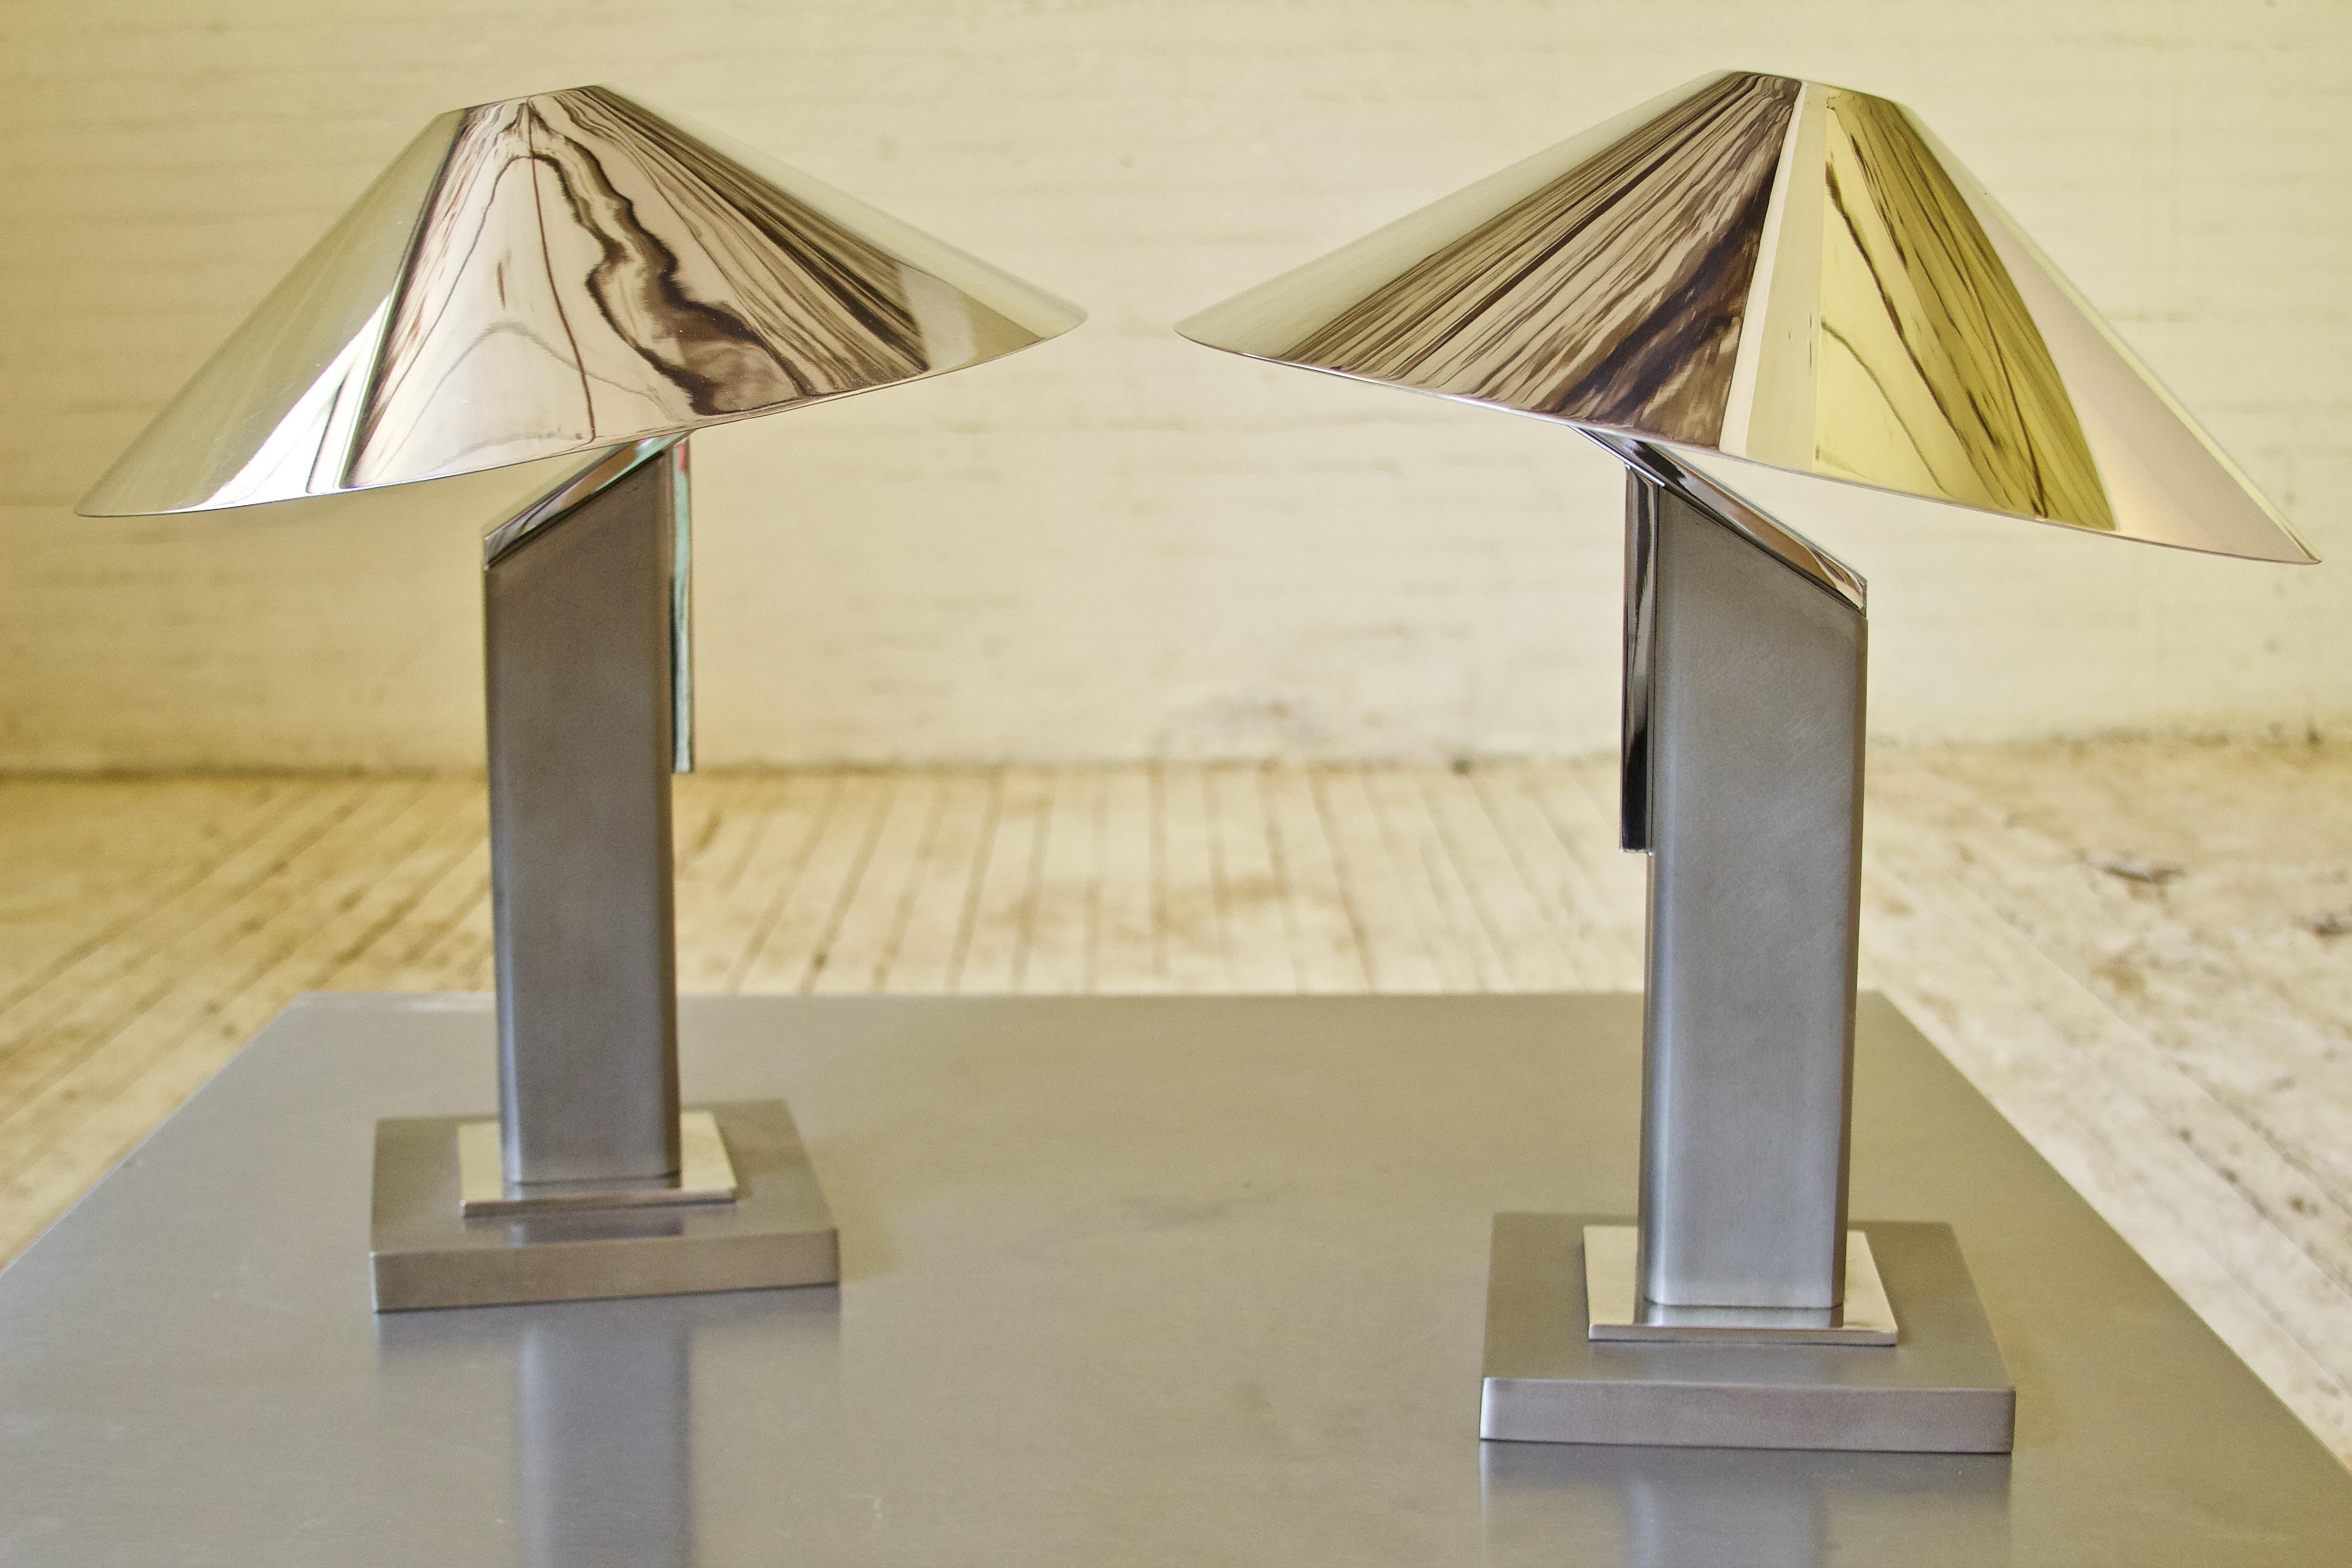 Striking pair of modernist table lamps by Columbian designer Sergio Orozco with cantilevered steel construction and polished steel shades. Great weight and quality to this pair, nice contrast created by different steel finishes. This design takes on